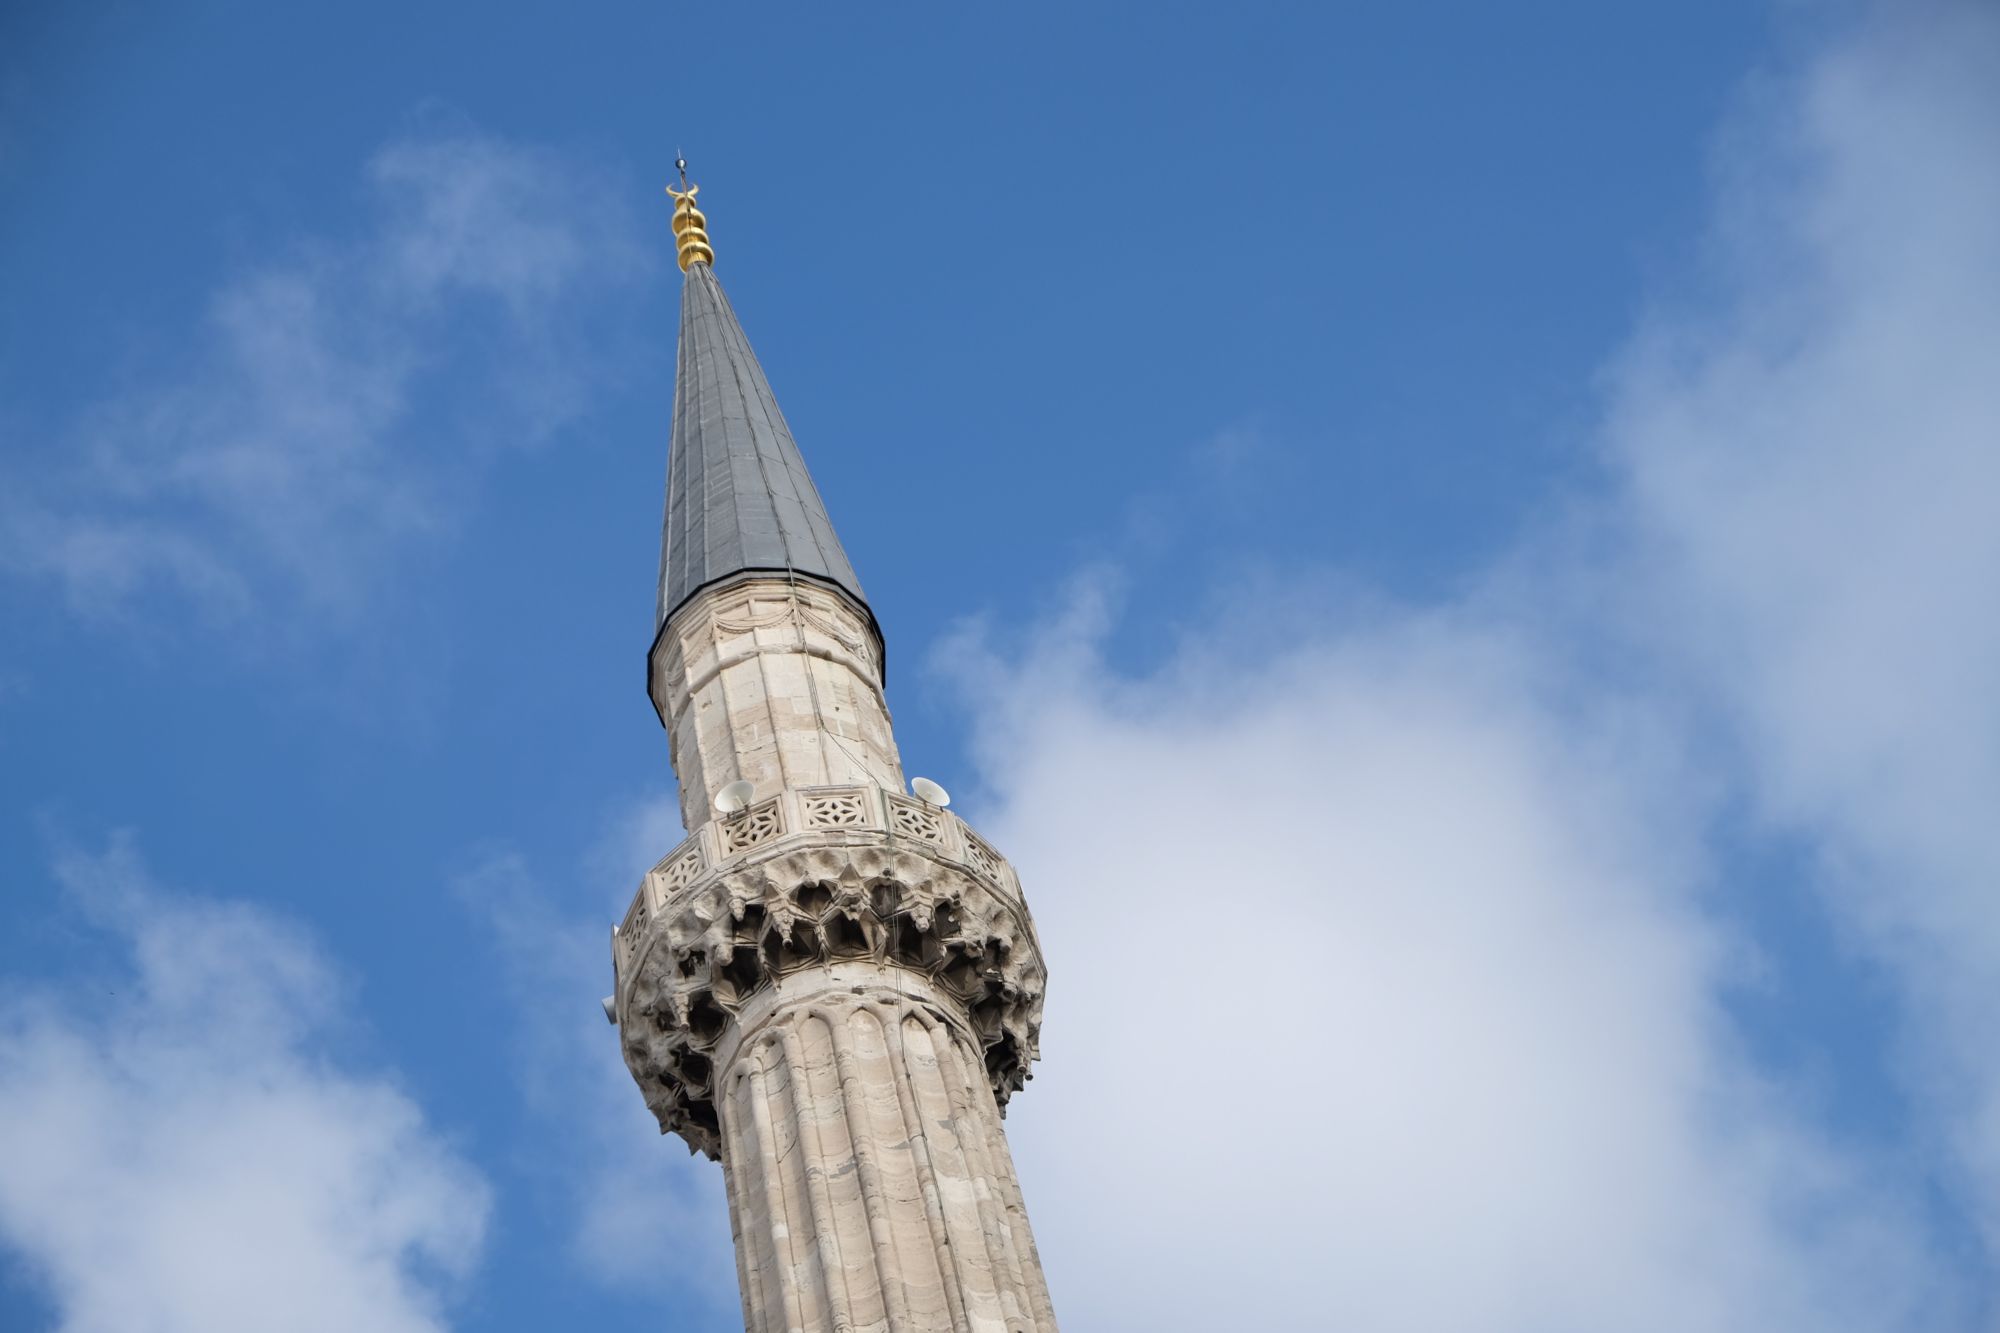 This picture is an attempt to represent a sound. The minarets project the call to prayer five times a day. It is a sound that I hear daily, in cities, towns and tiny villages. I particularly notice the punctual 1pm reminder, which usually reminds me that I should eat lunch. 